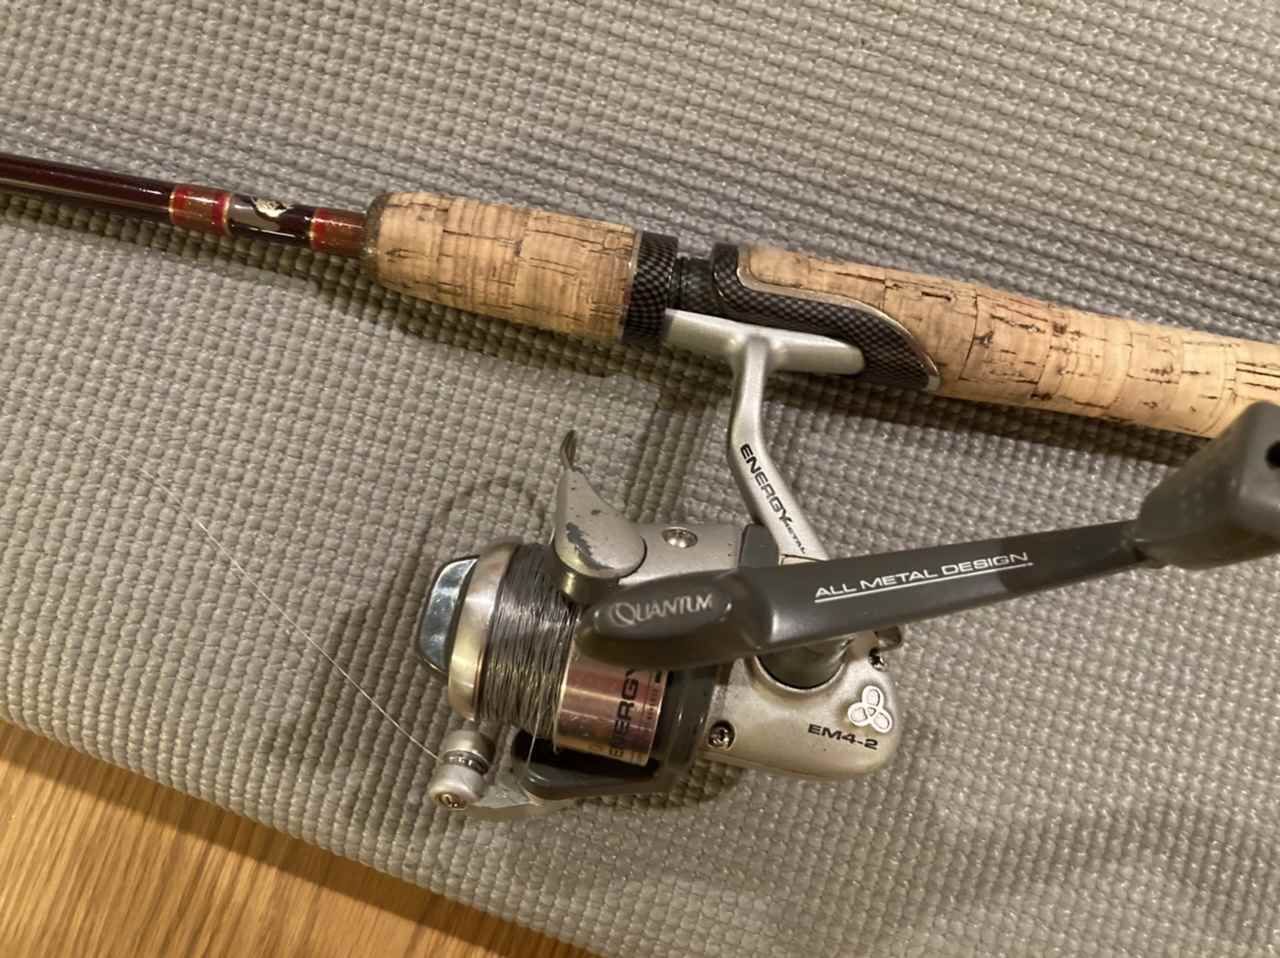 You guys like the old stuff? - Fishing Rods, Reels, Line, and